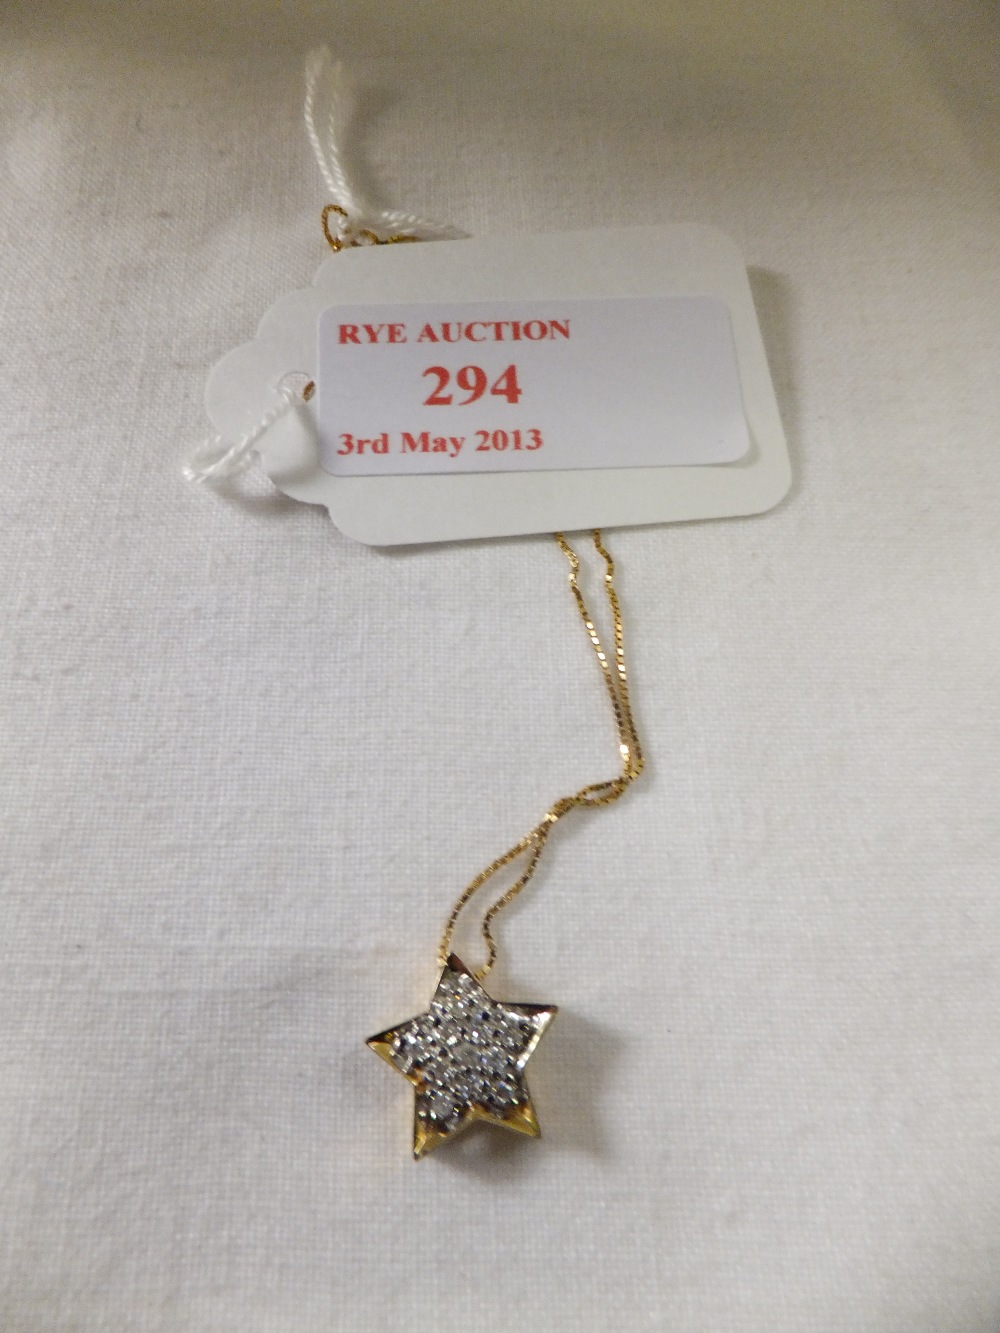 An 18ct gold "star" pendant on a 16" 9ct gold chain